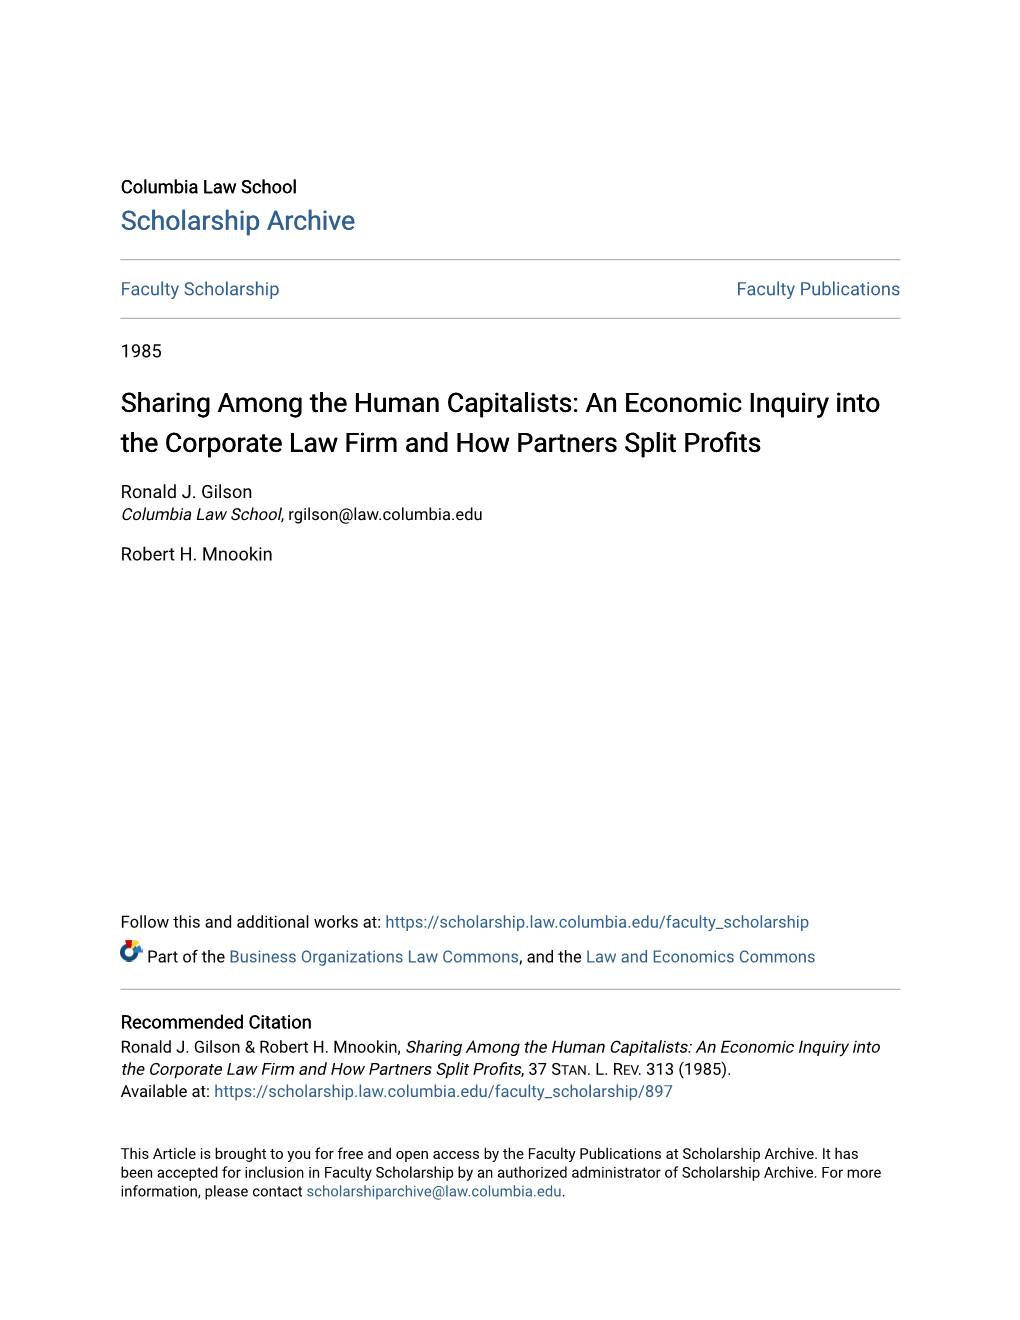 Sharing Among the Human Capitalists: an Economic Inquiry Into the Corporate Law Firm and How Partners Split Profits